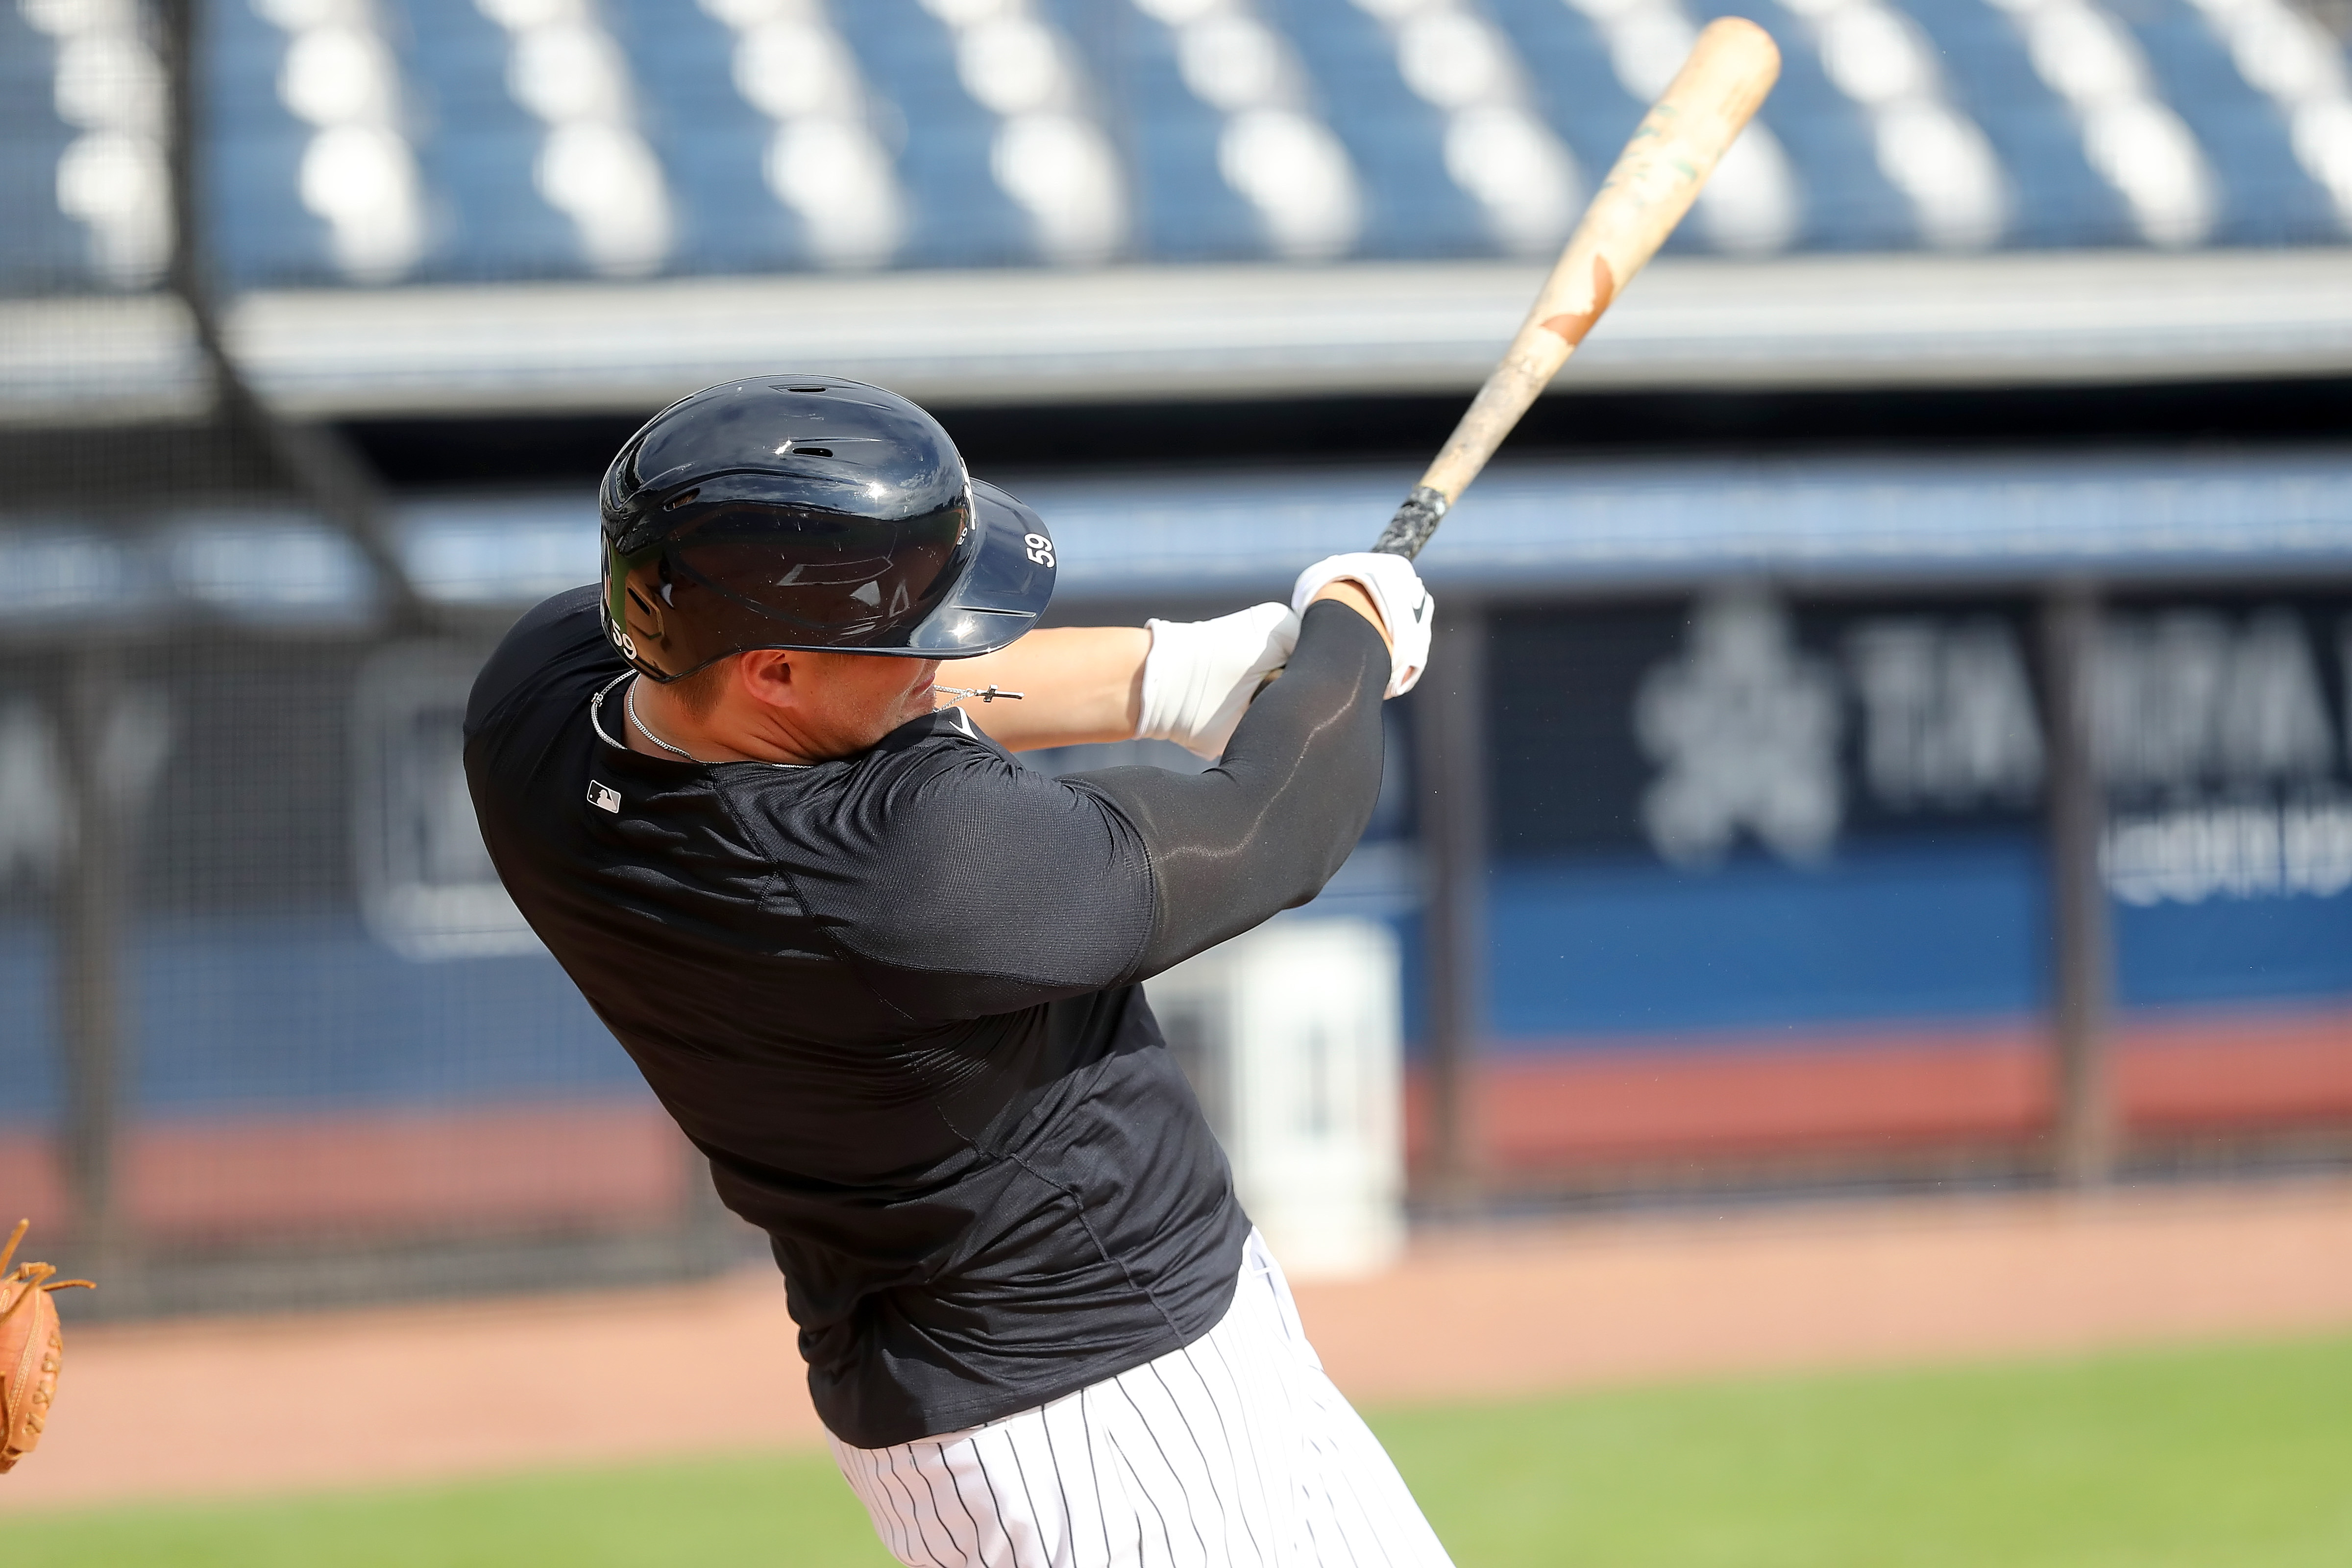 Is Luke Voit Enough to Save the San Diego Padres?